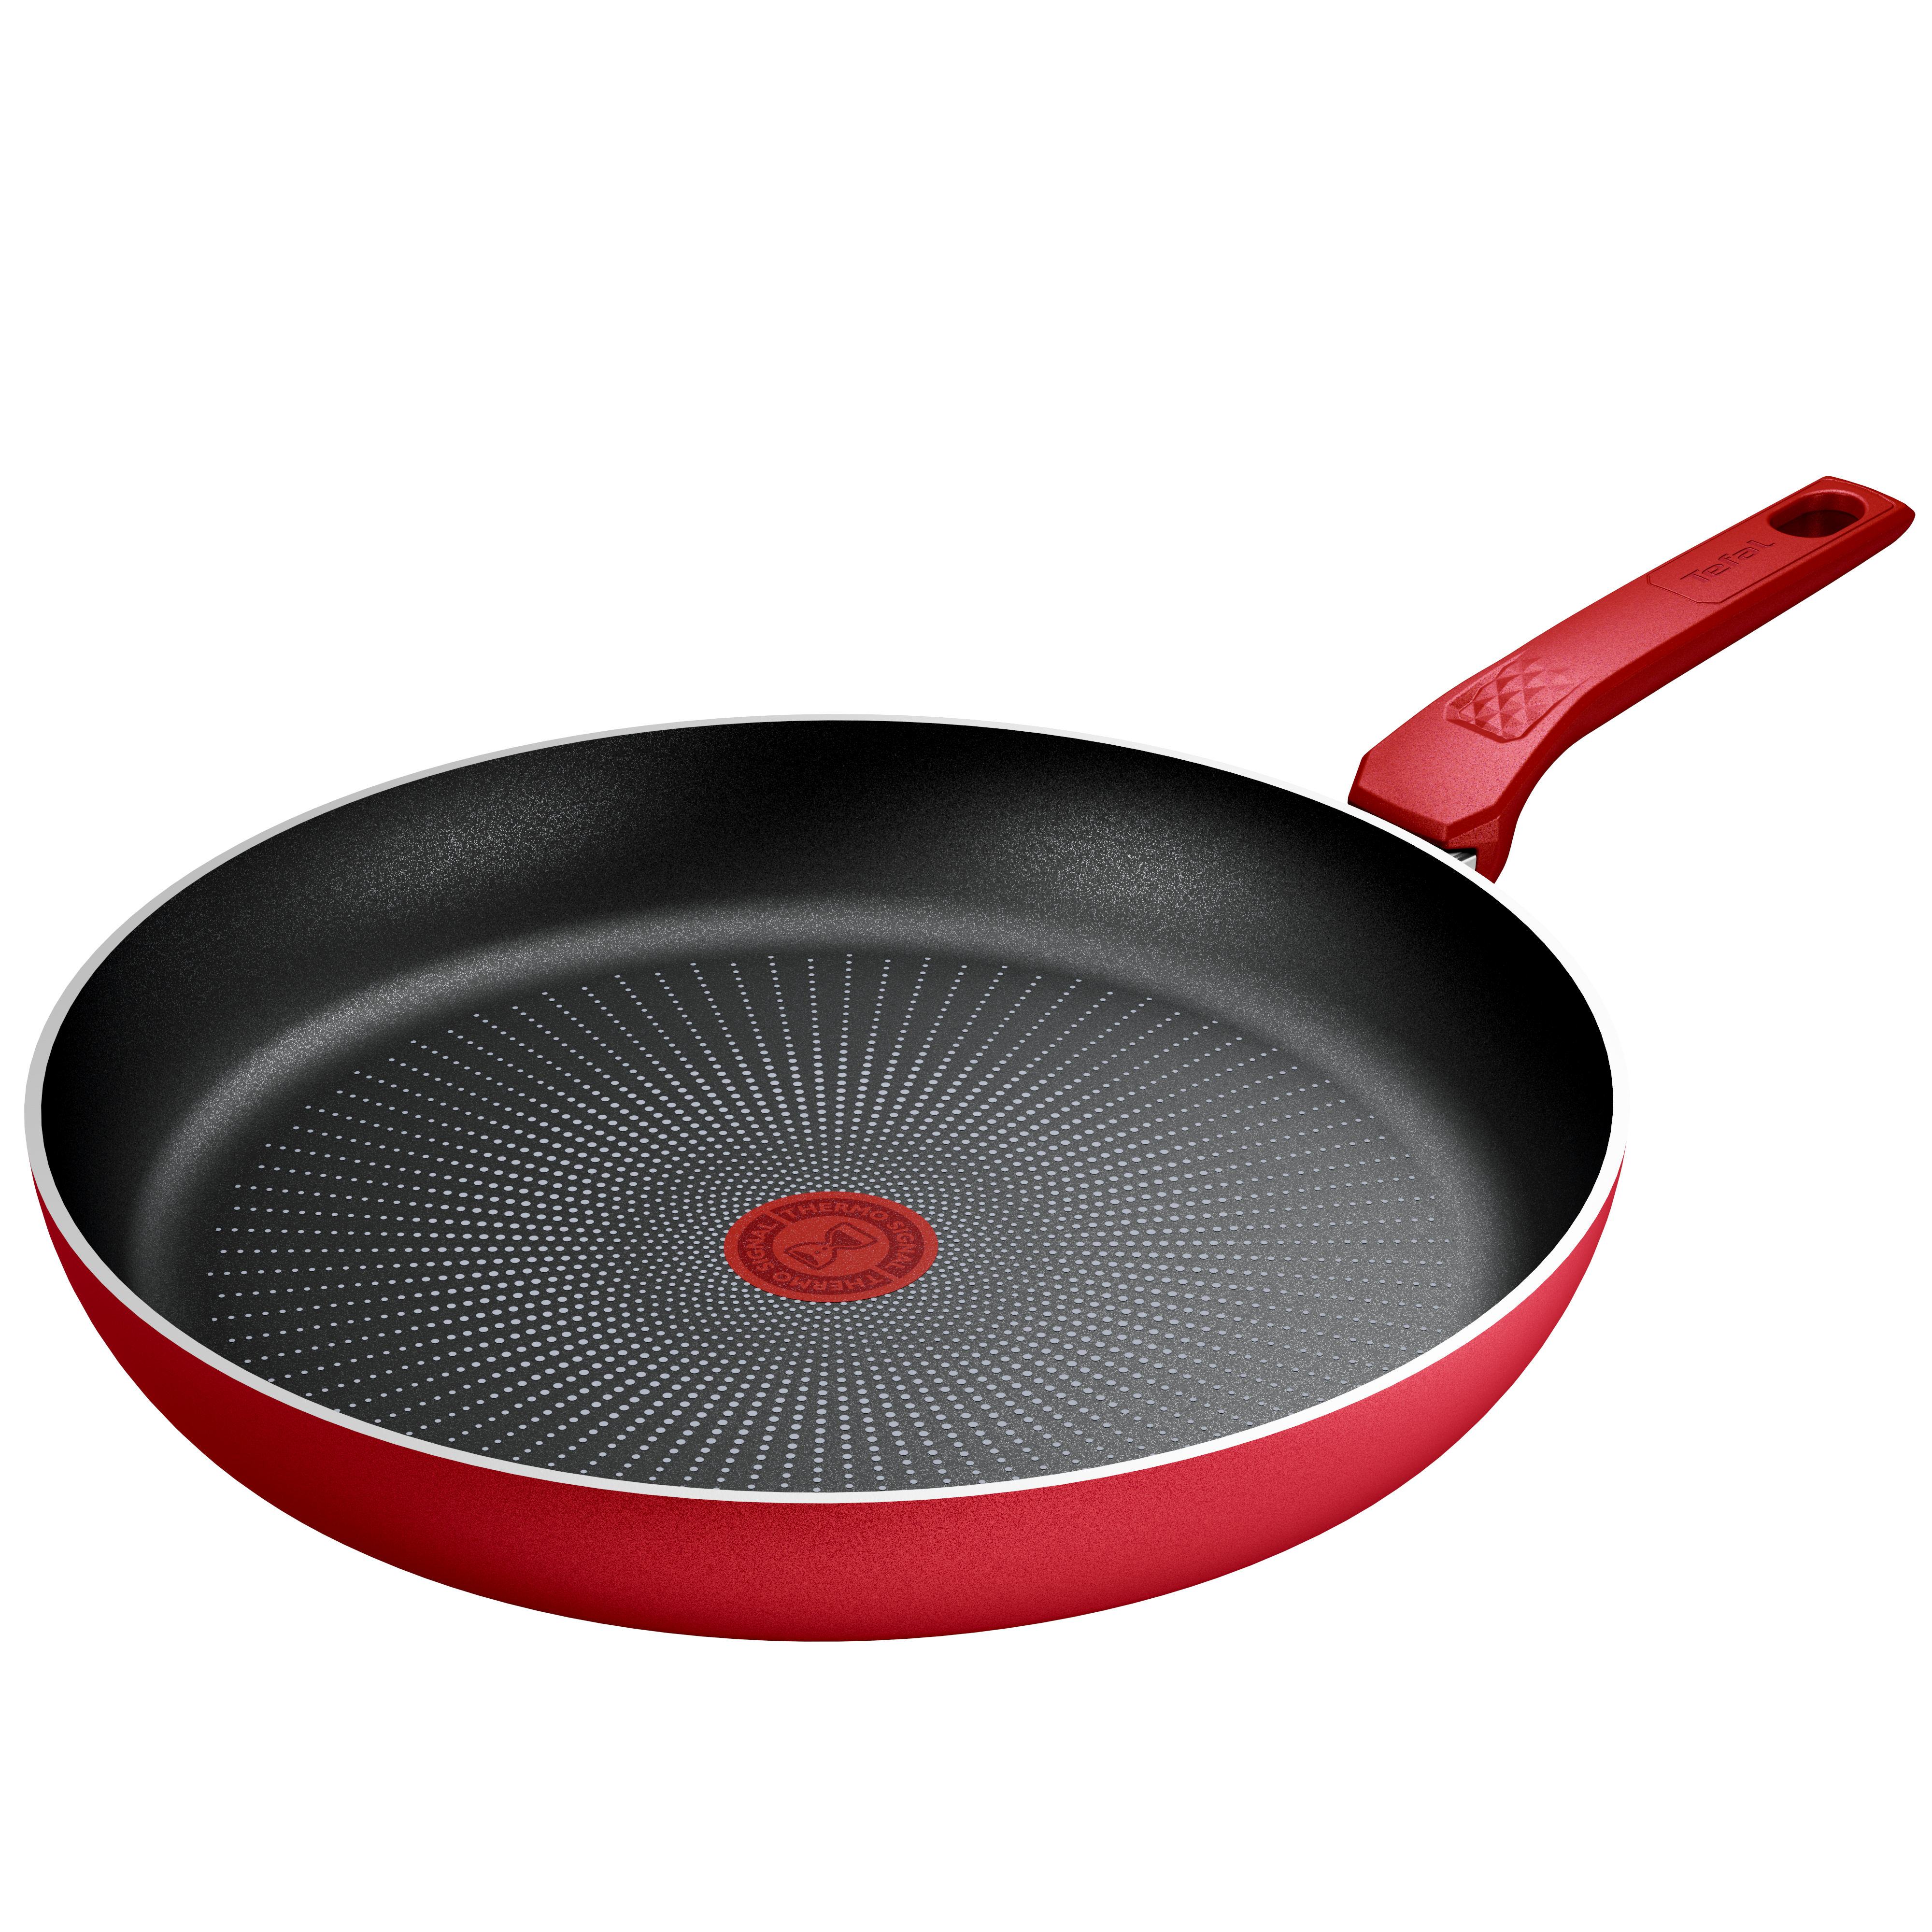 Tefal Daily Expert Red Induction Non-Stick Frypan 32cm